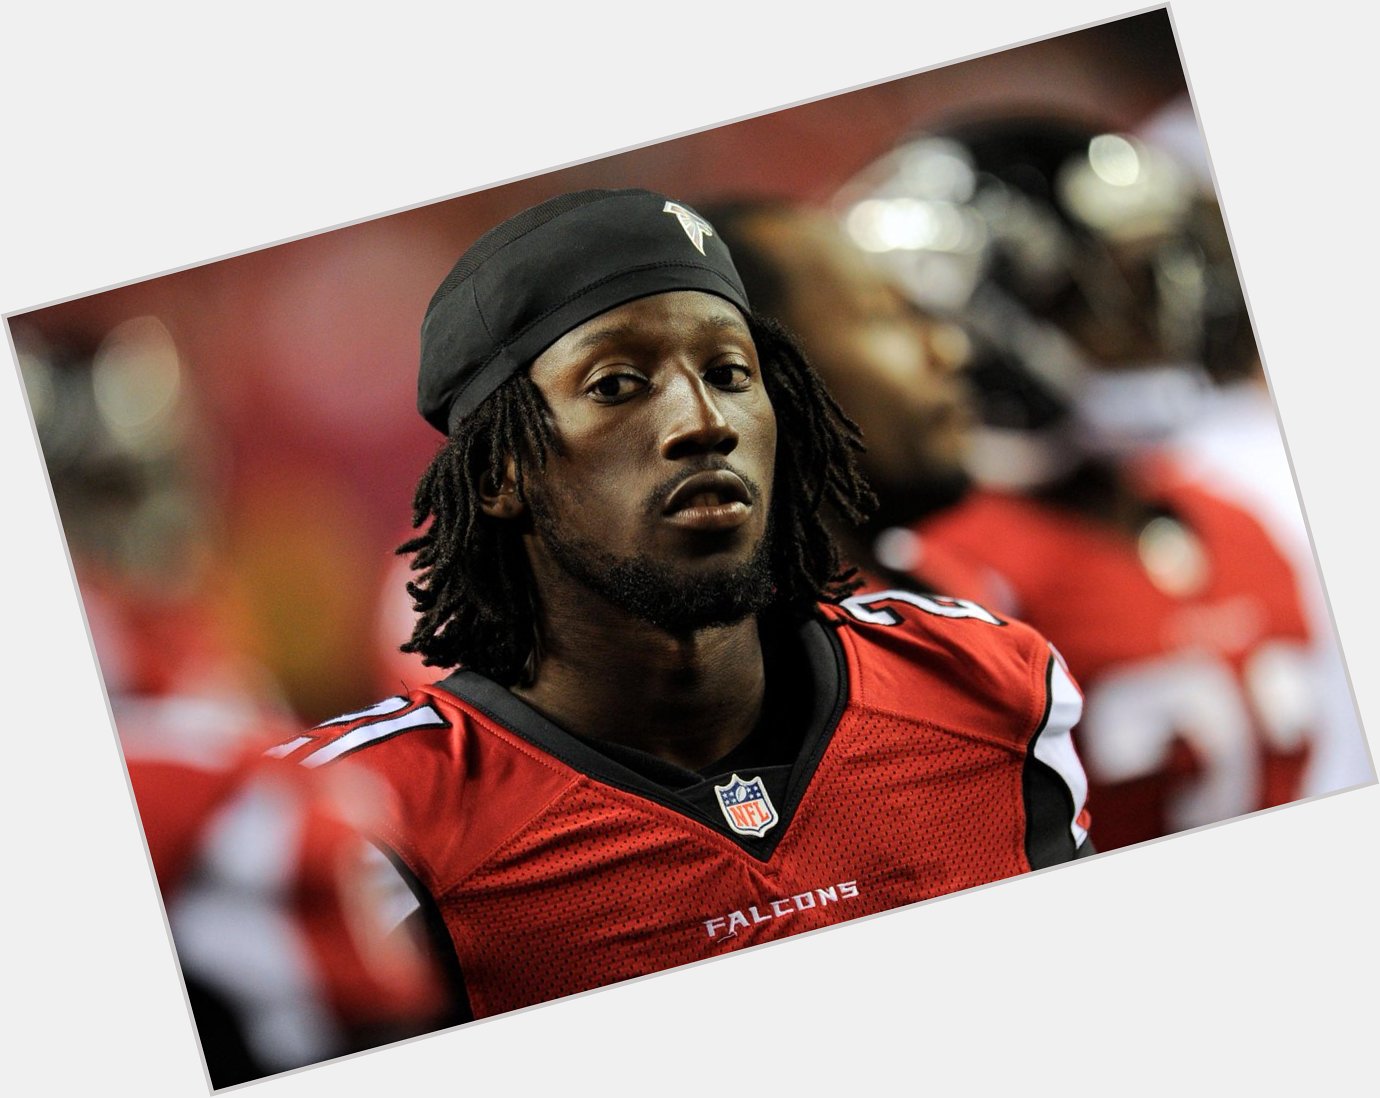 Happy 25th birthday to the one and only Desmond Trufant! Congratulations 